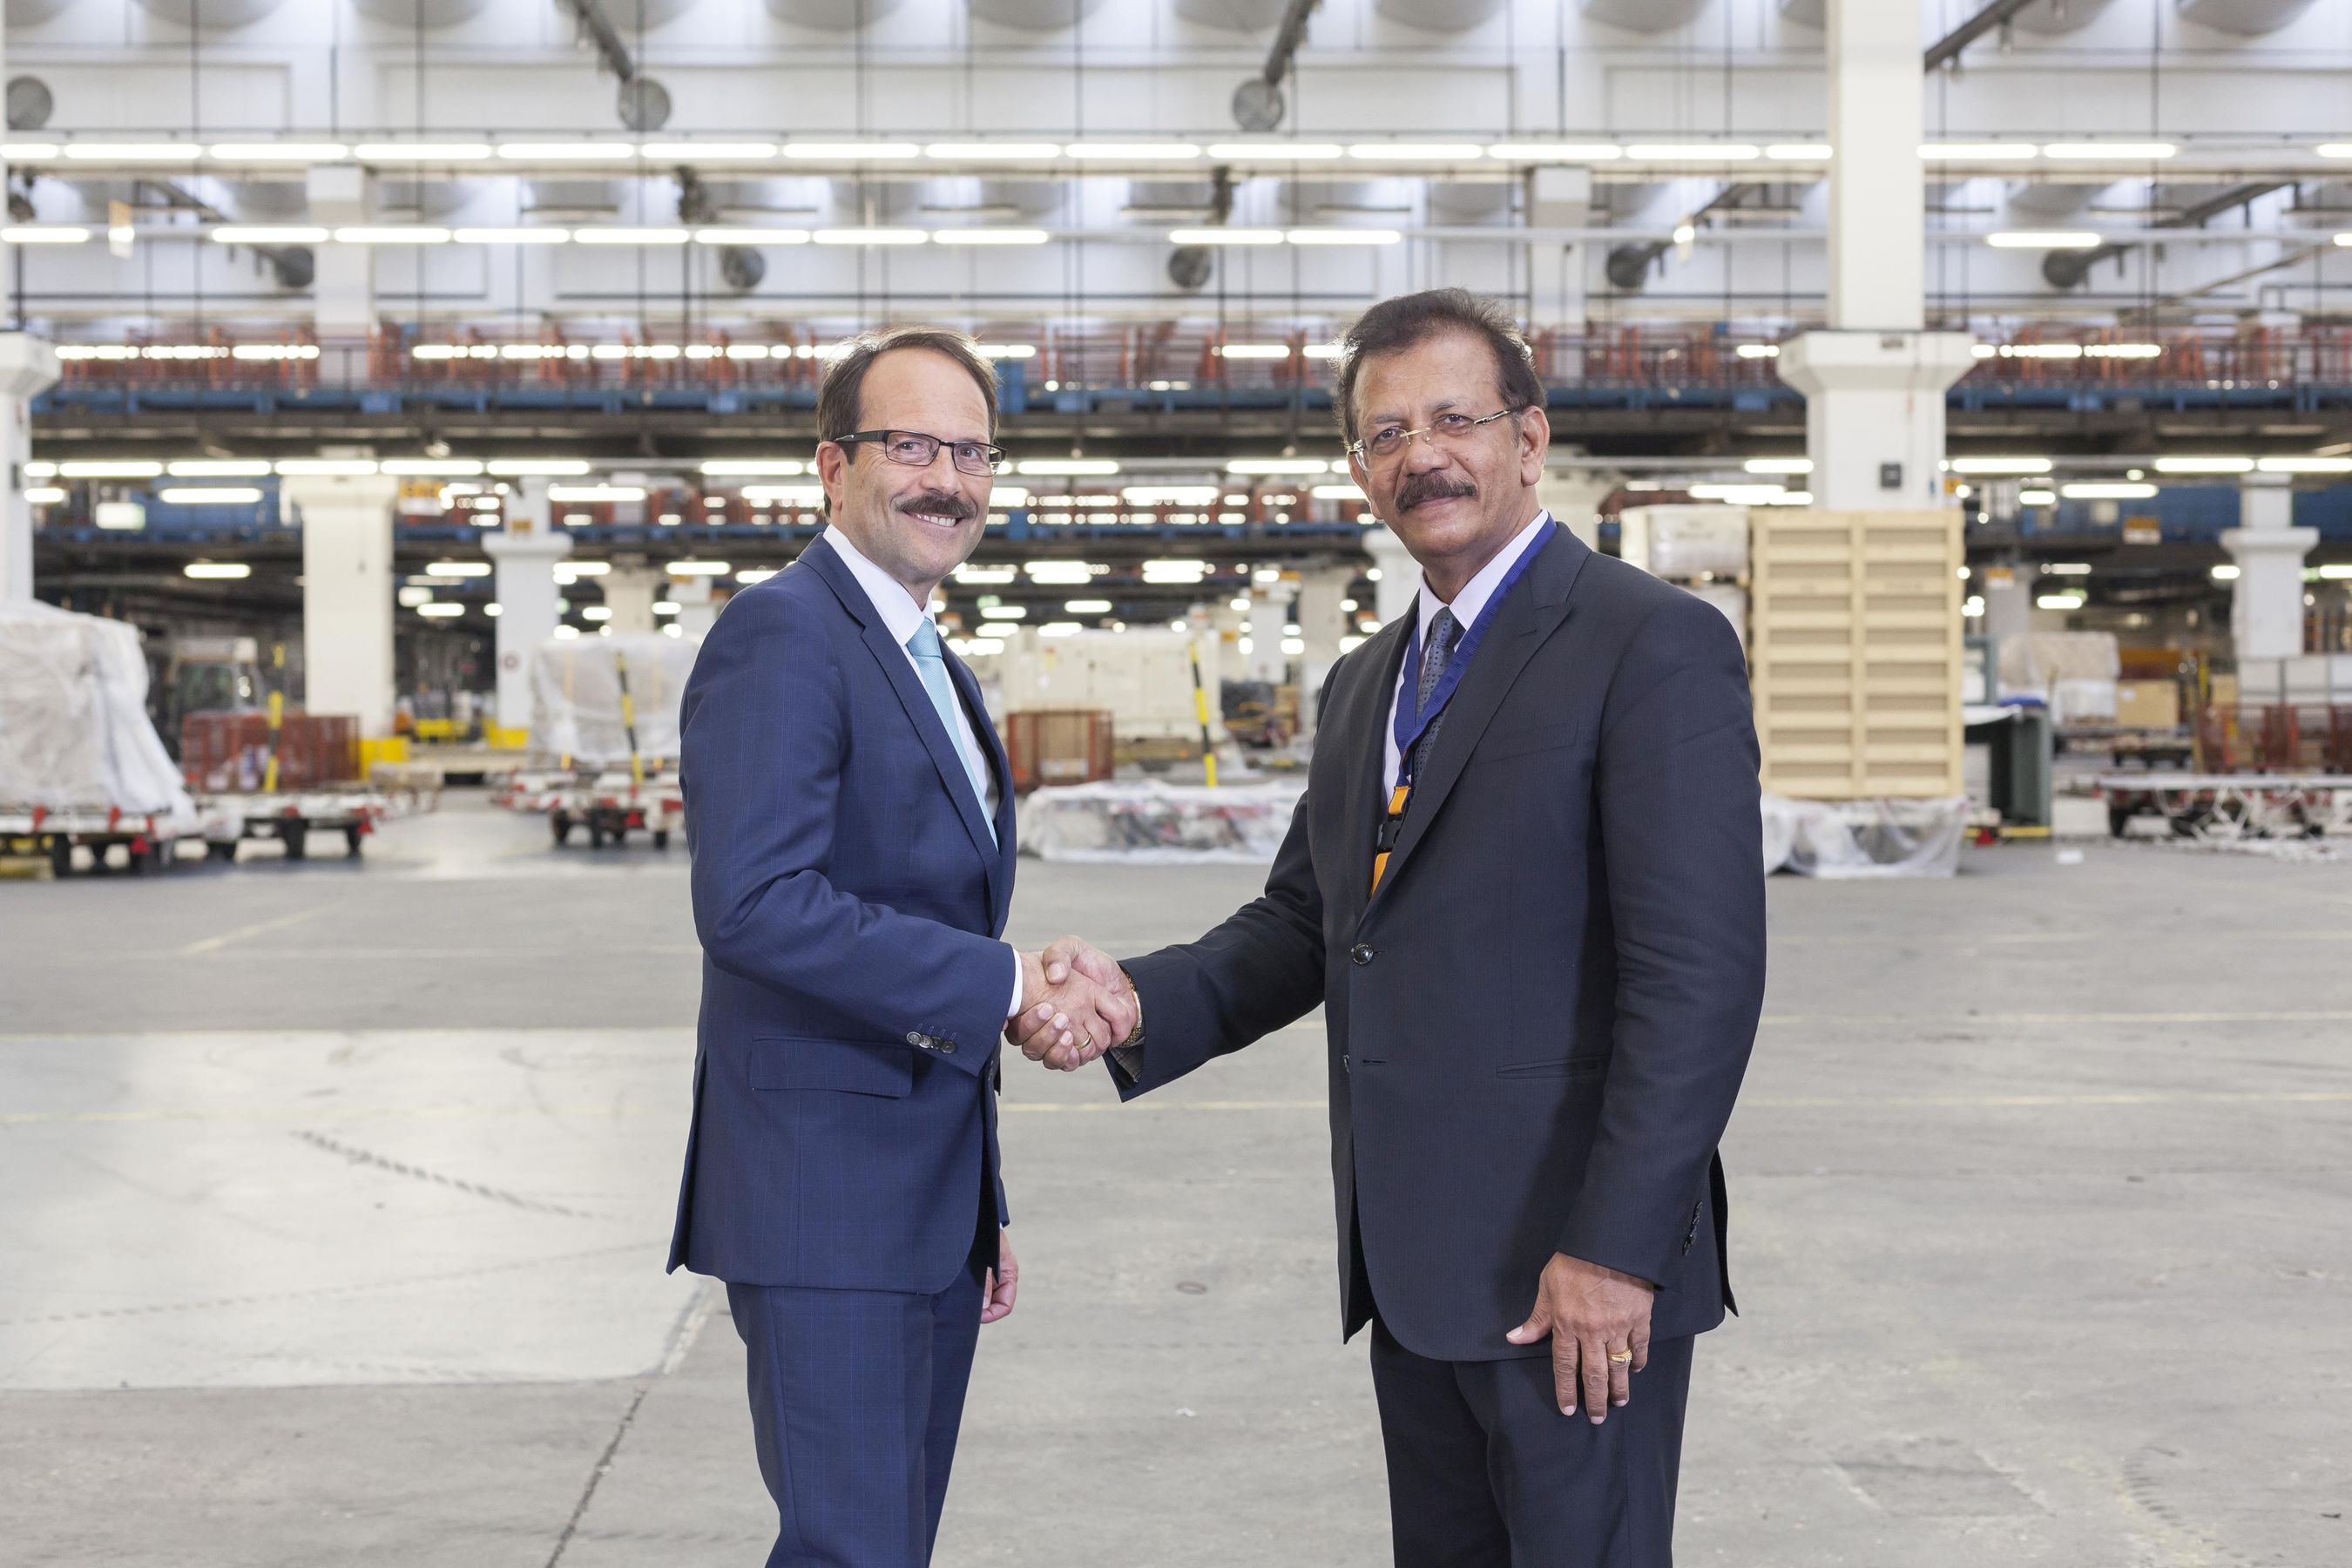 Dr. Karl-Rudolf Rupprecht, Executive Board Member - Operations, Lufthansa Cargo and IBS Software Services Executive Chairman, V K Mathews at the iCAP Switch-over Ceremony held at Lufthansa Cargo Warehouse. (PRNewsFoto/IBS Software Services)